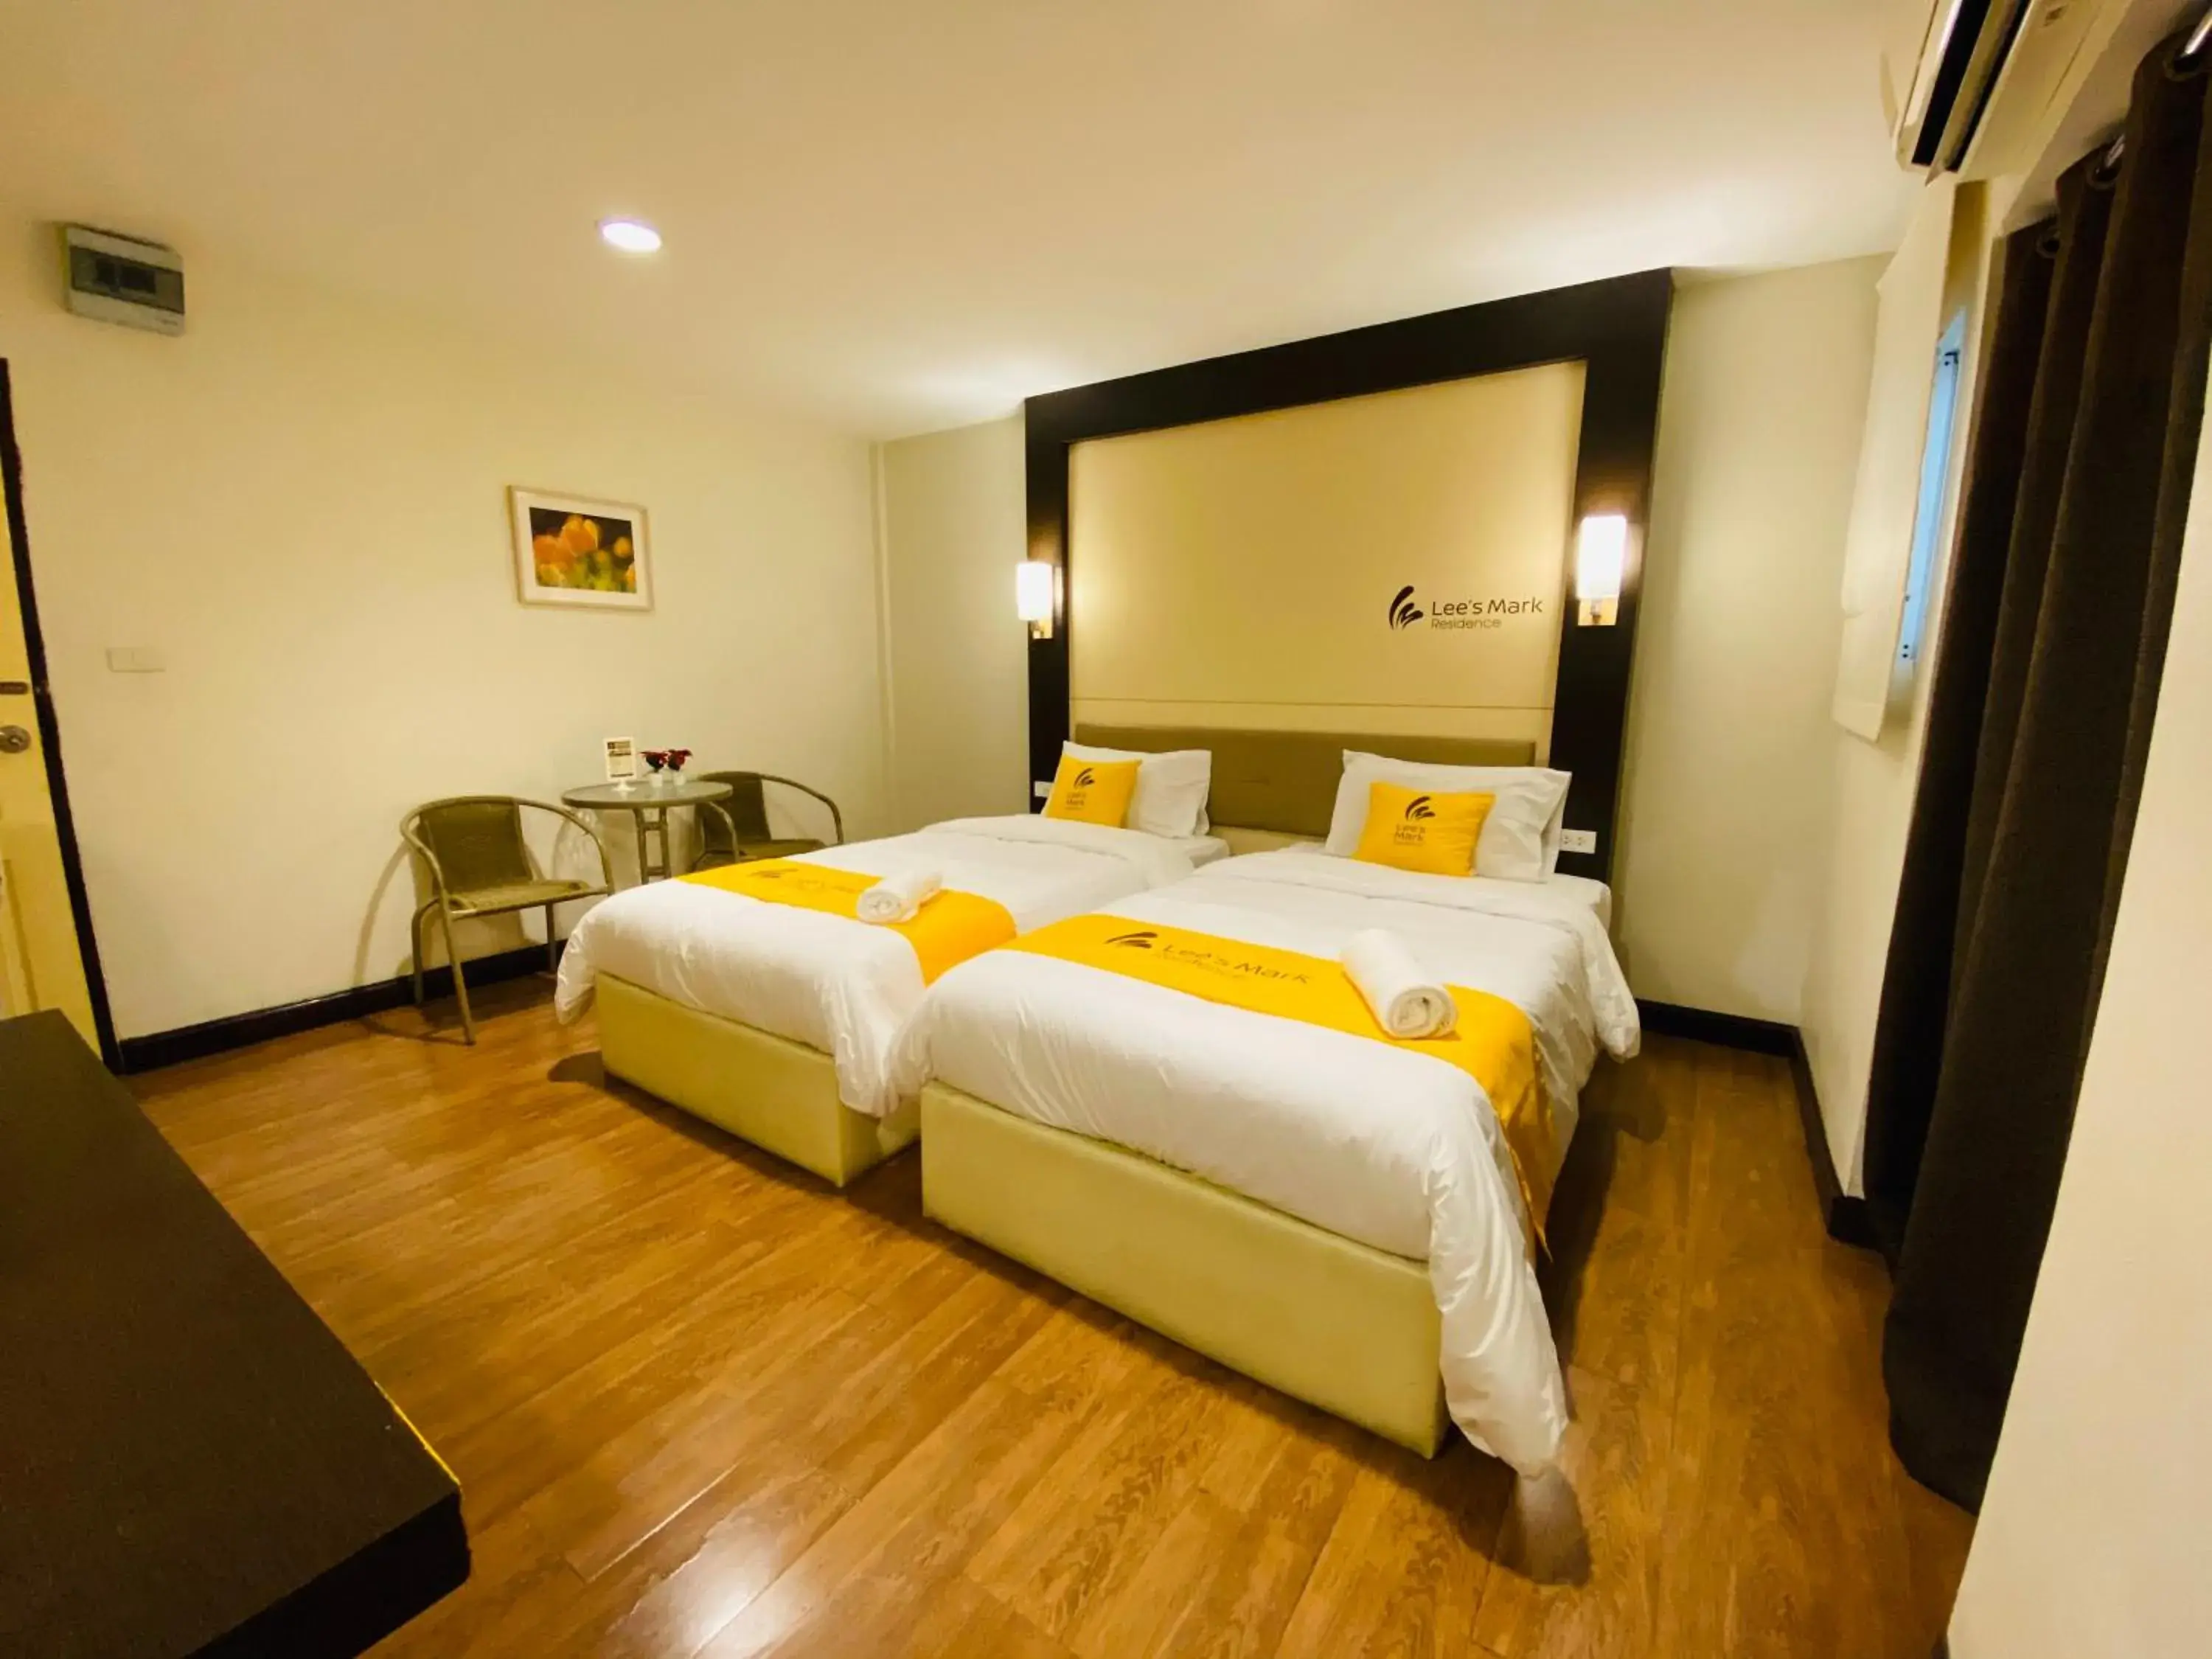 Deluxe Twin Room in Lee's Mark Residence